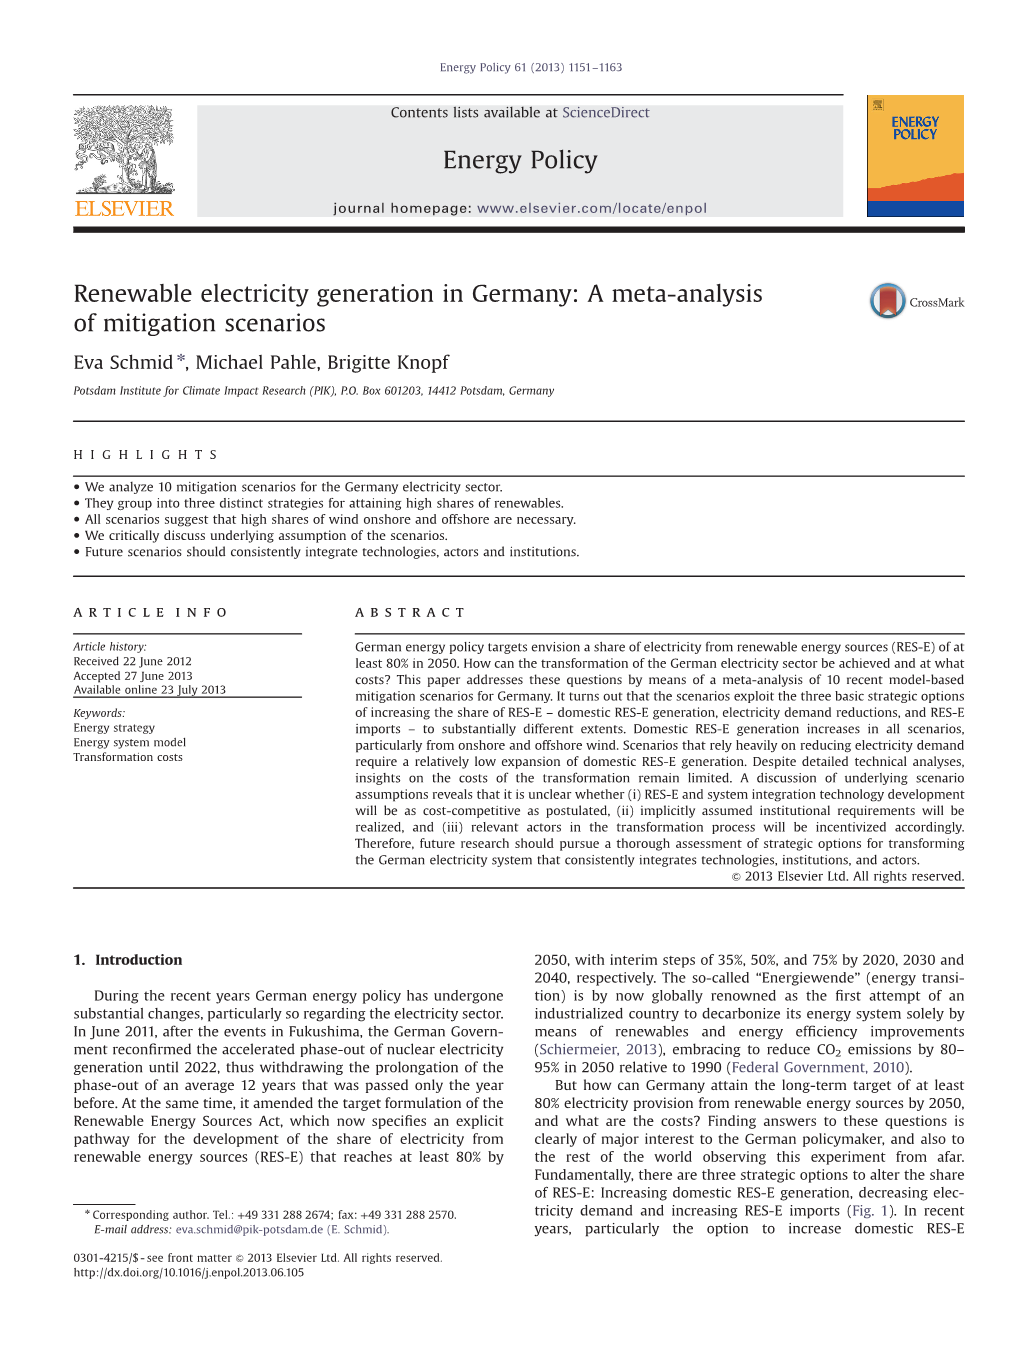 Renewable Electricity Generation in Germany a Meta